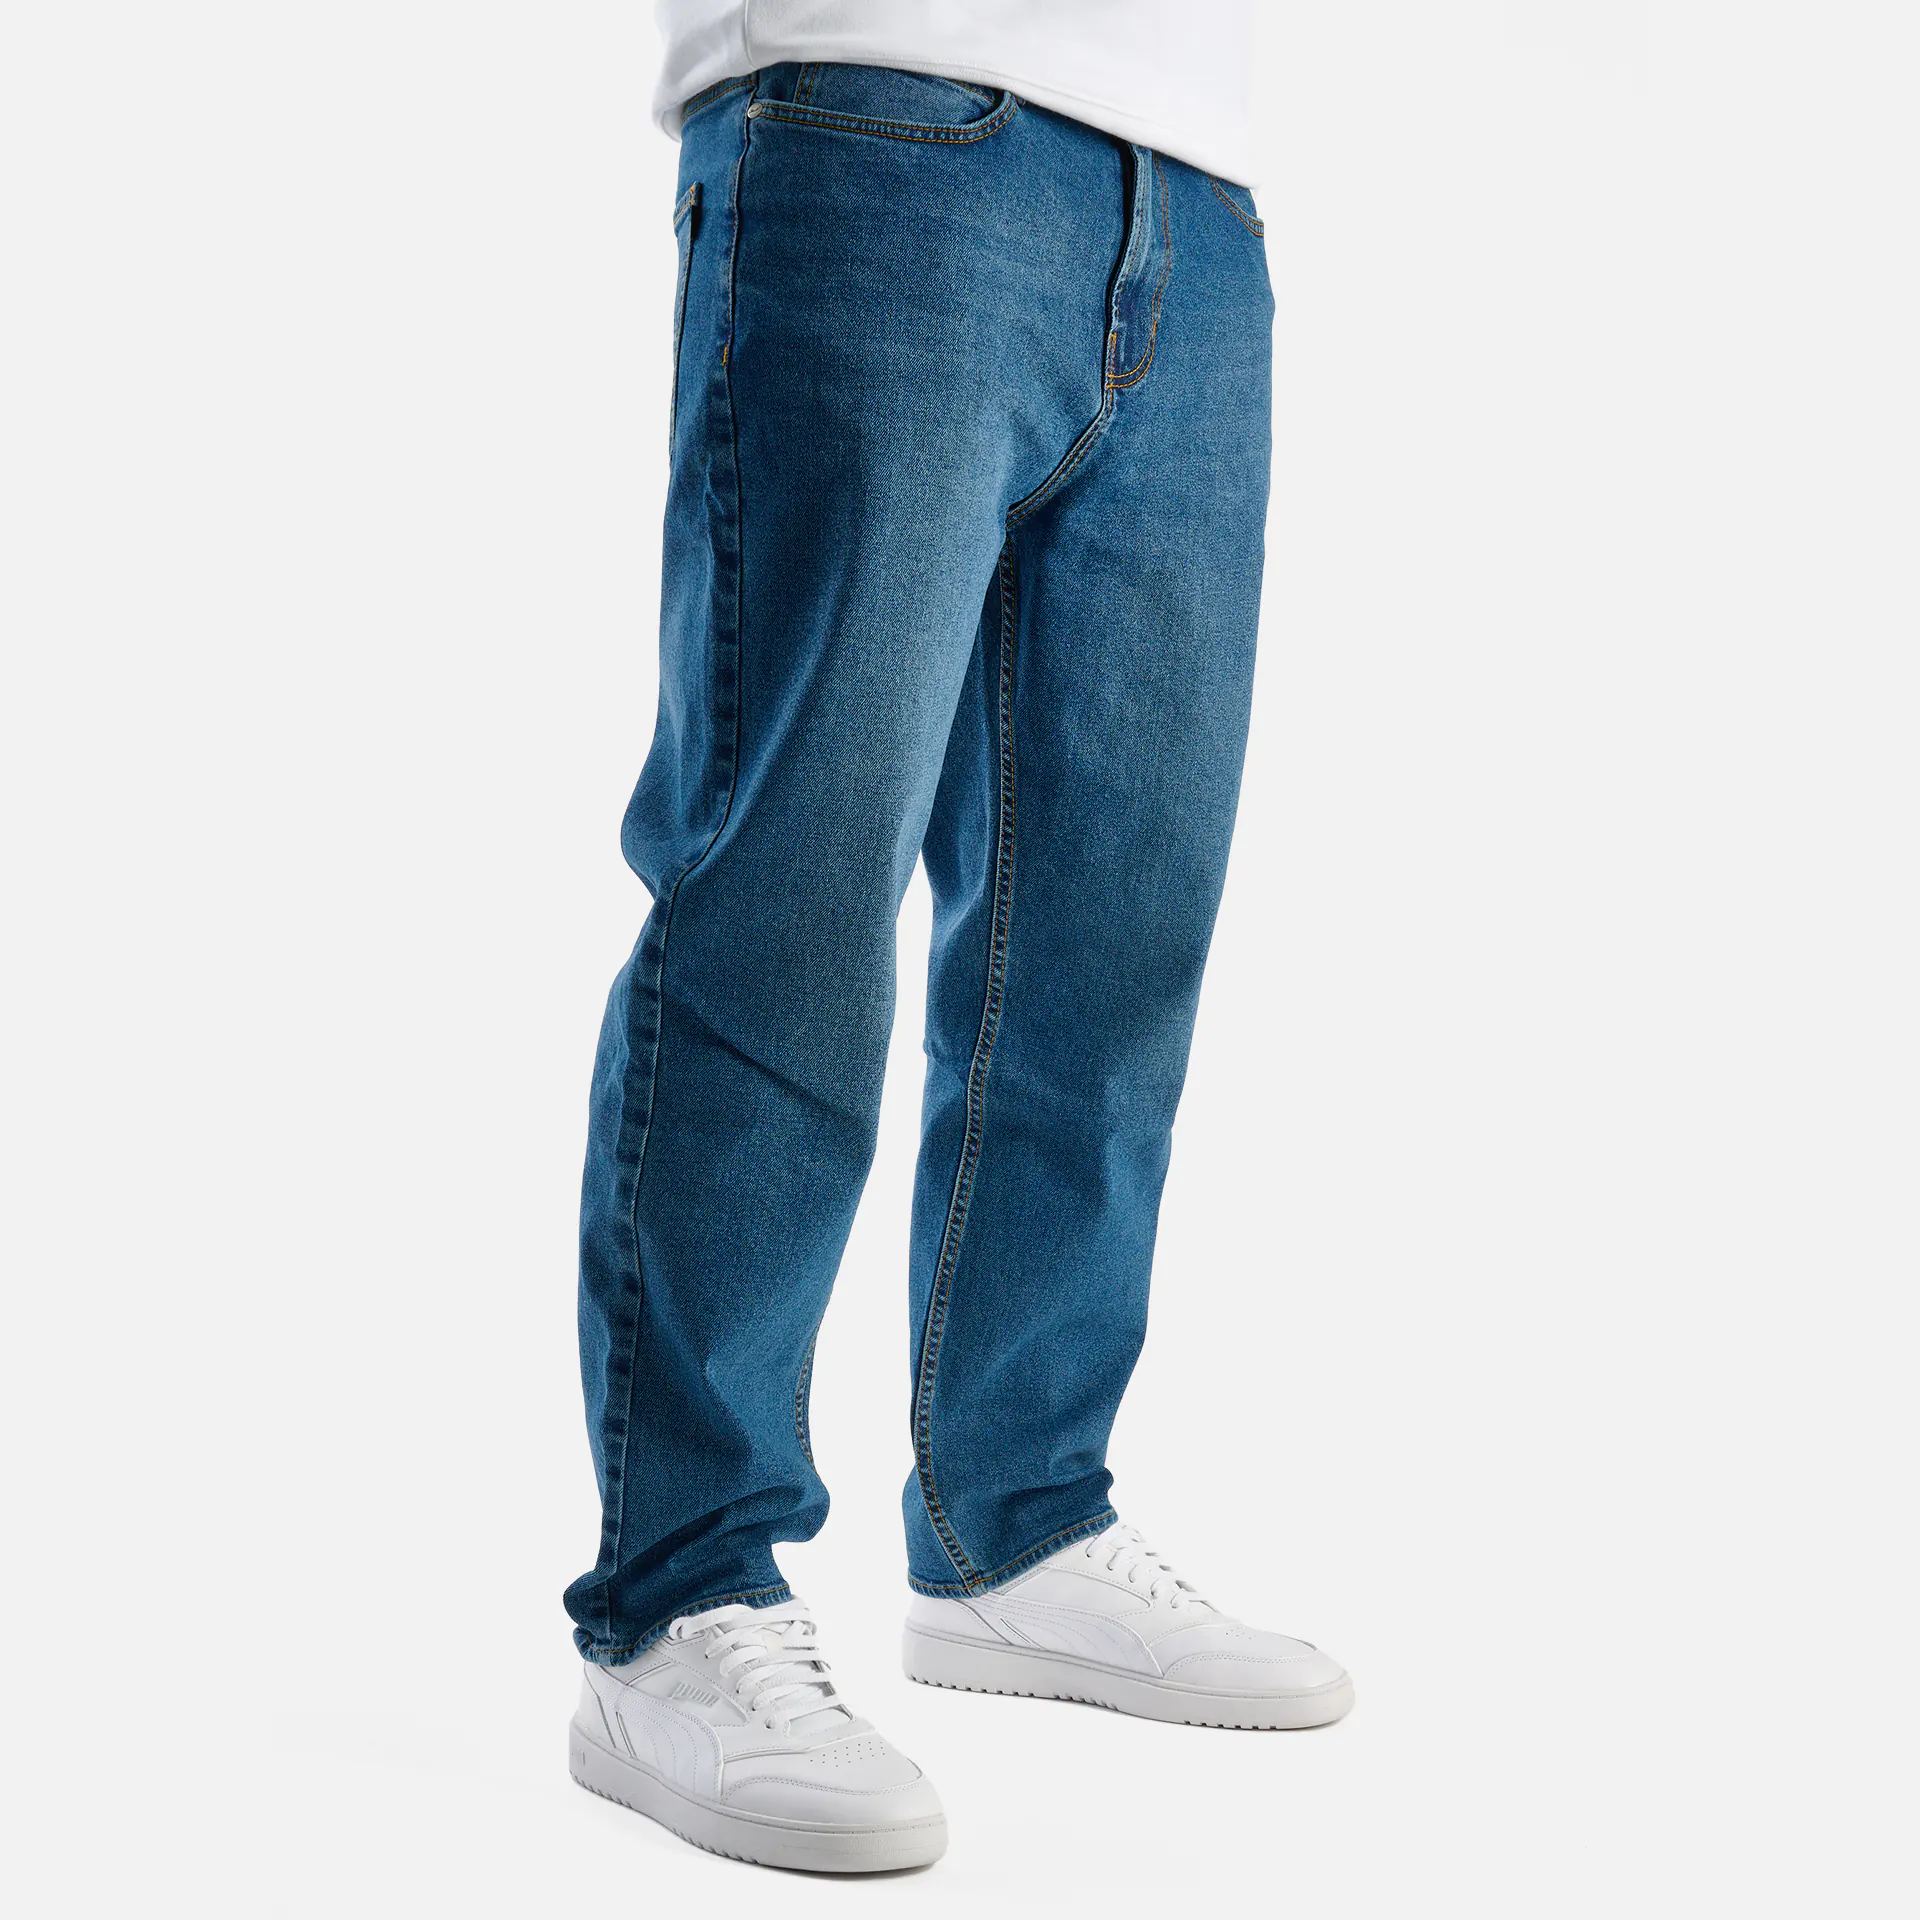 Reell Jeans Rave Tapered Fit Jeans Retro Mid Blue